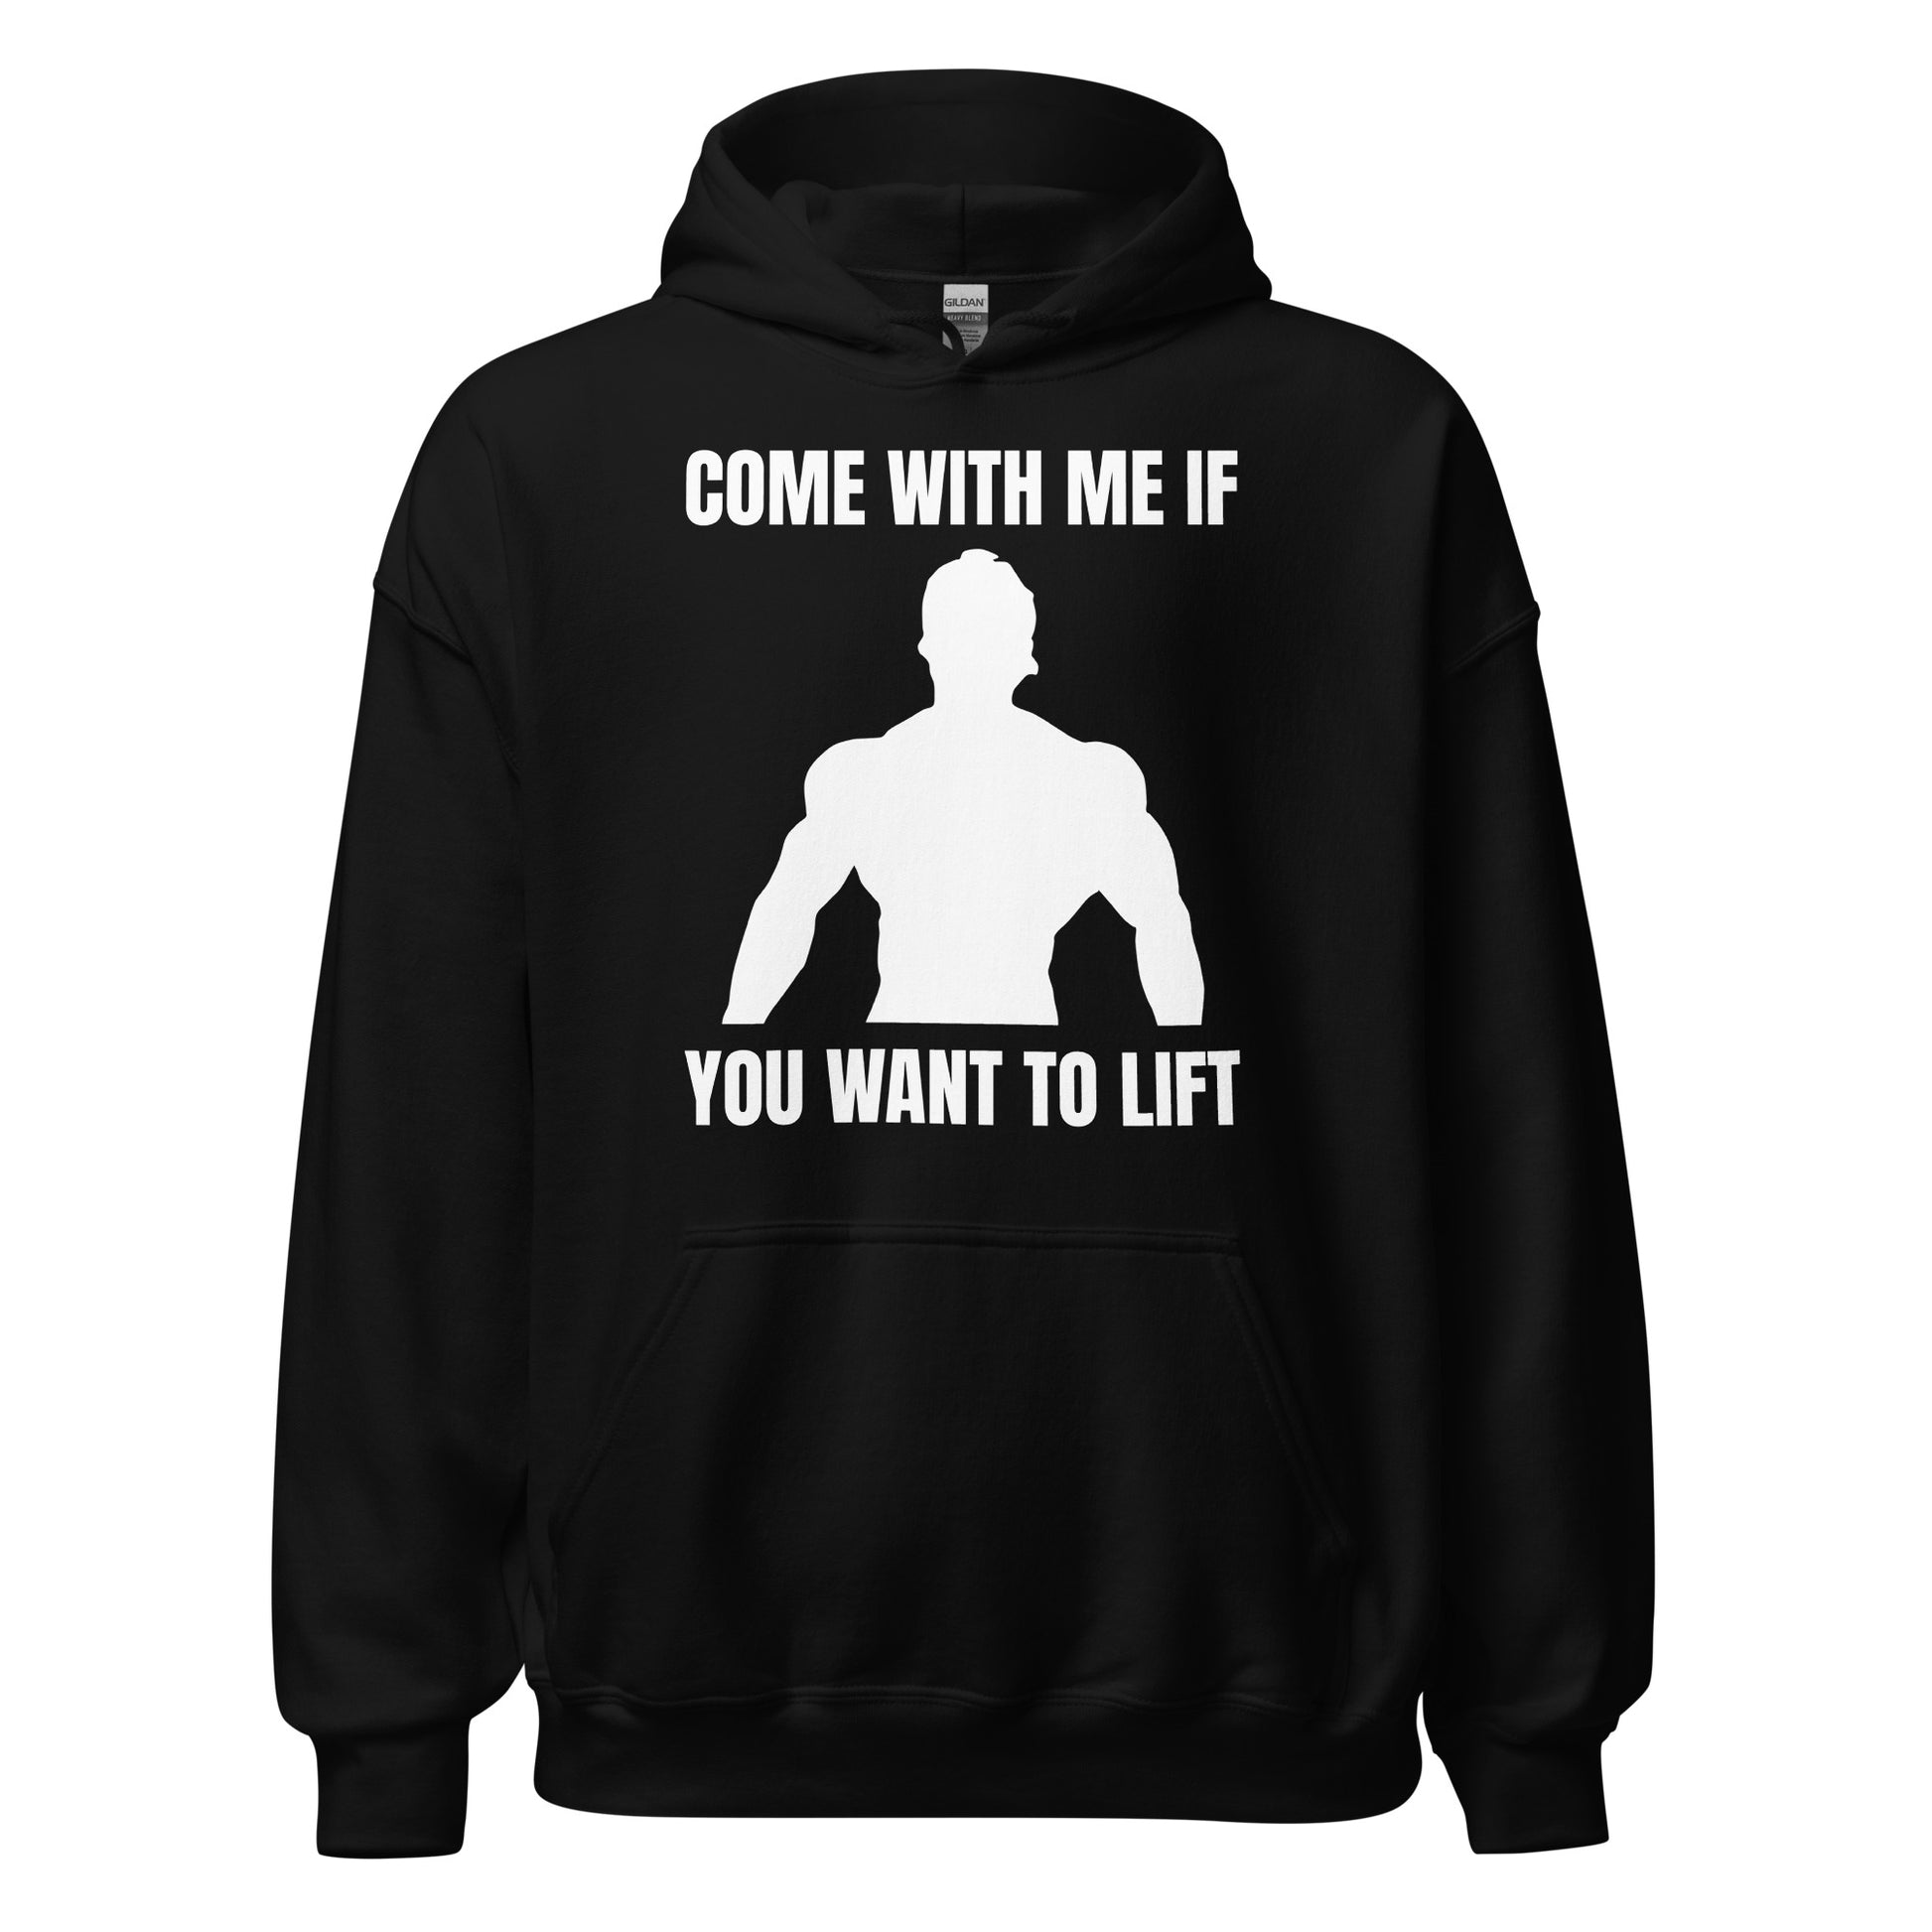 Come with Me if You Want to Lift Hoodie in Black